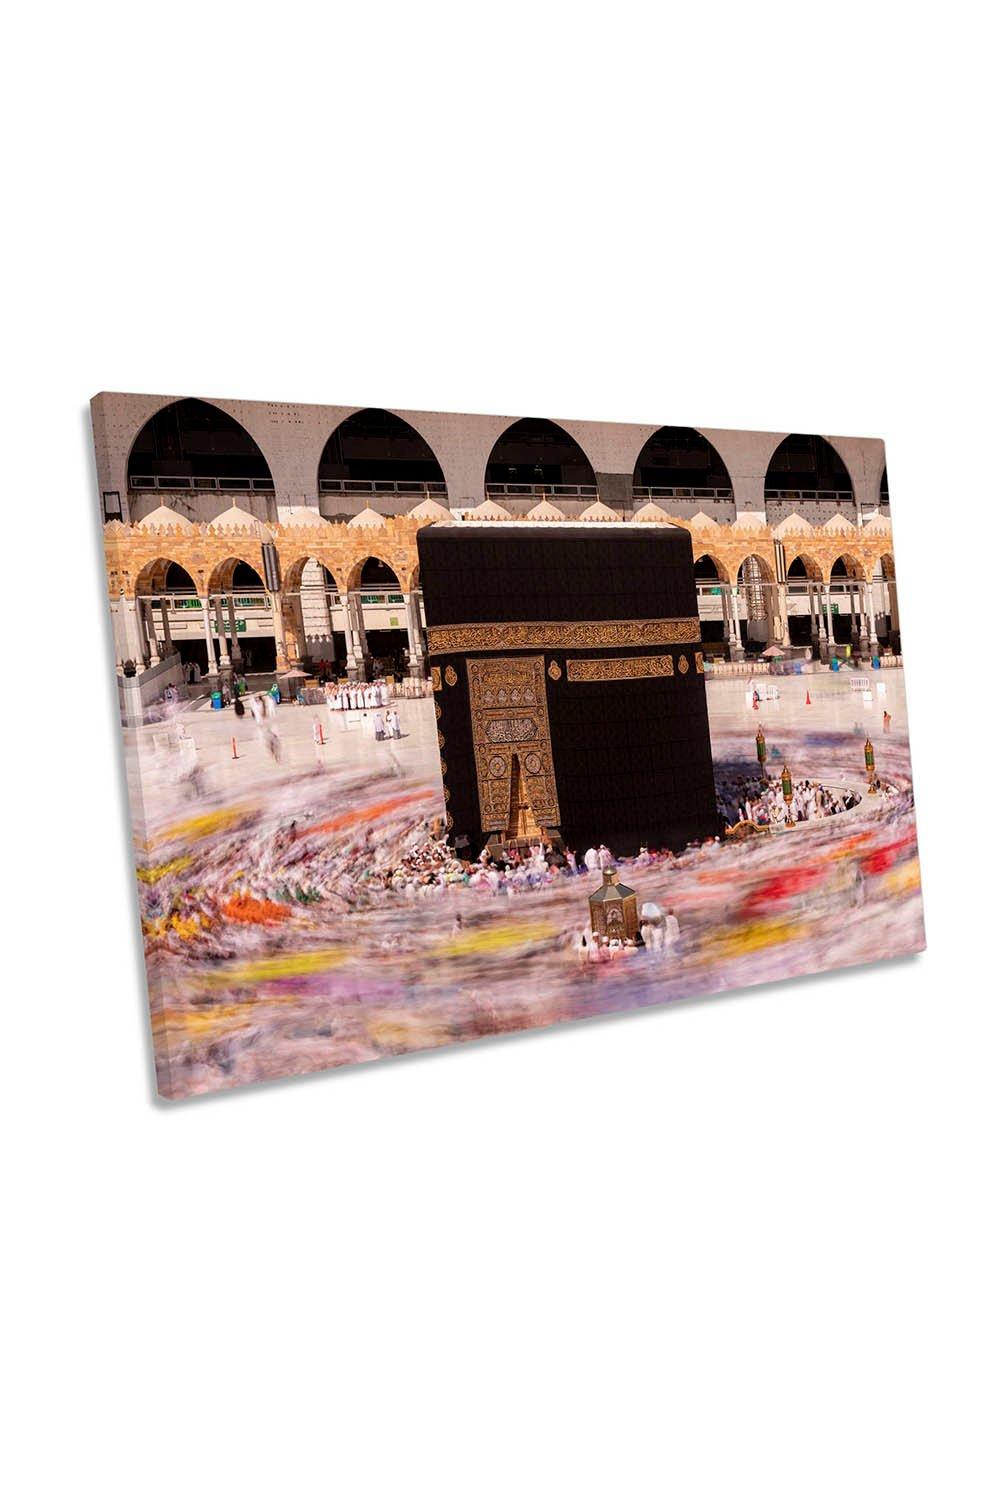 Holy Mosque Makkah Mecca Religion Canvas Wall Art Picture Print